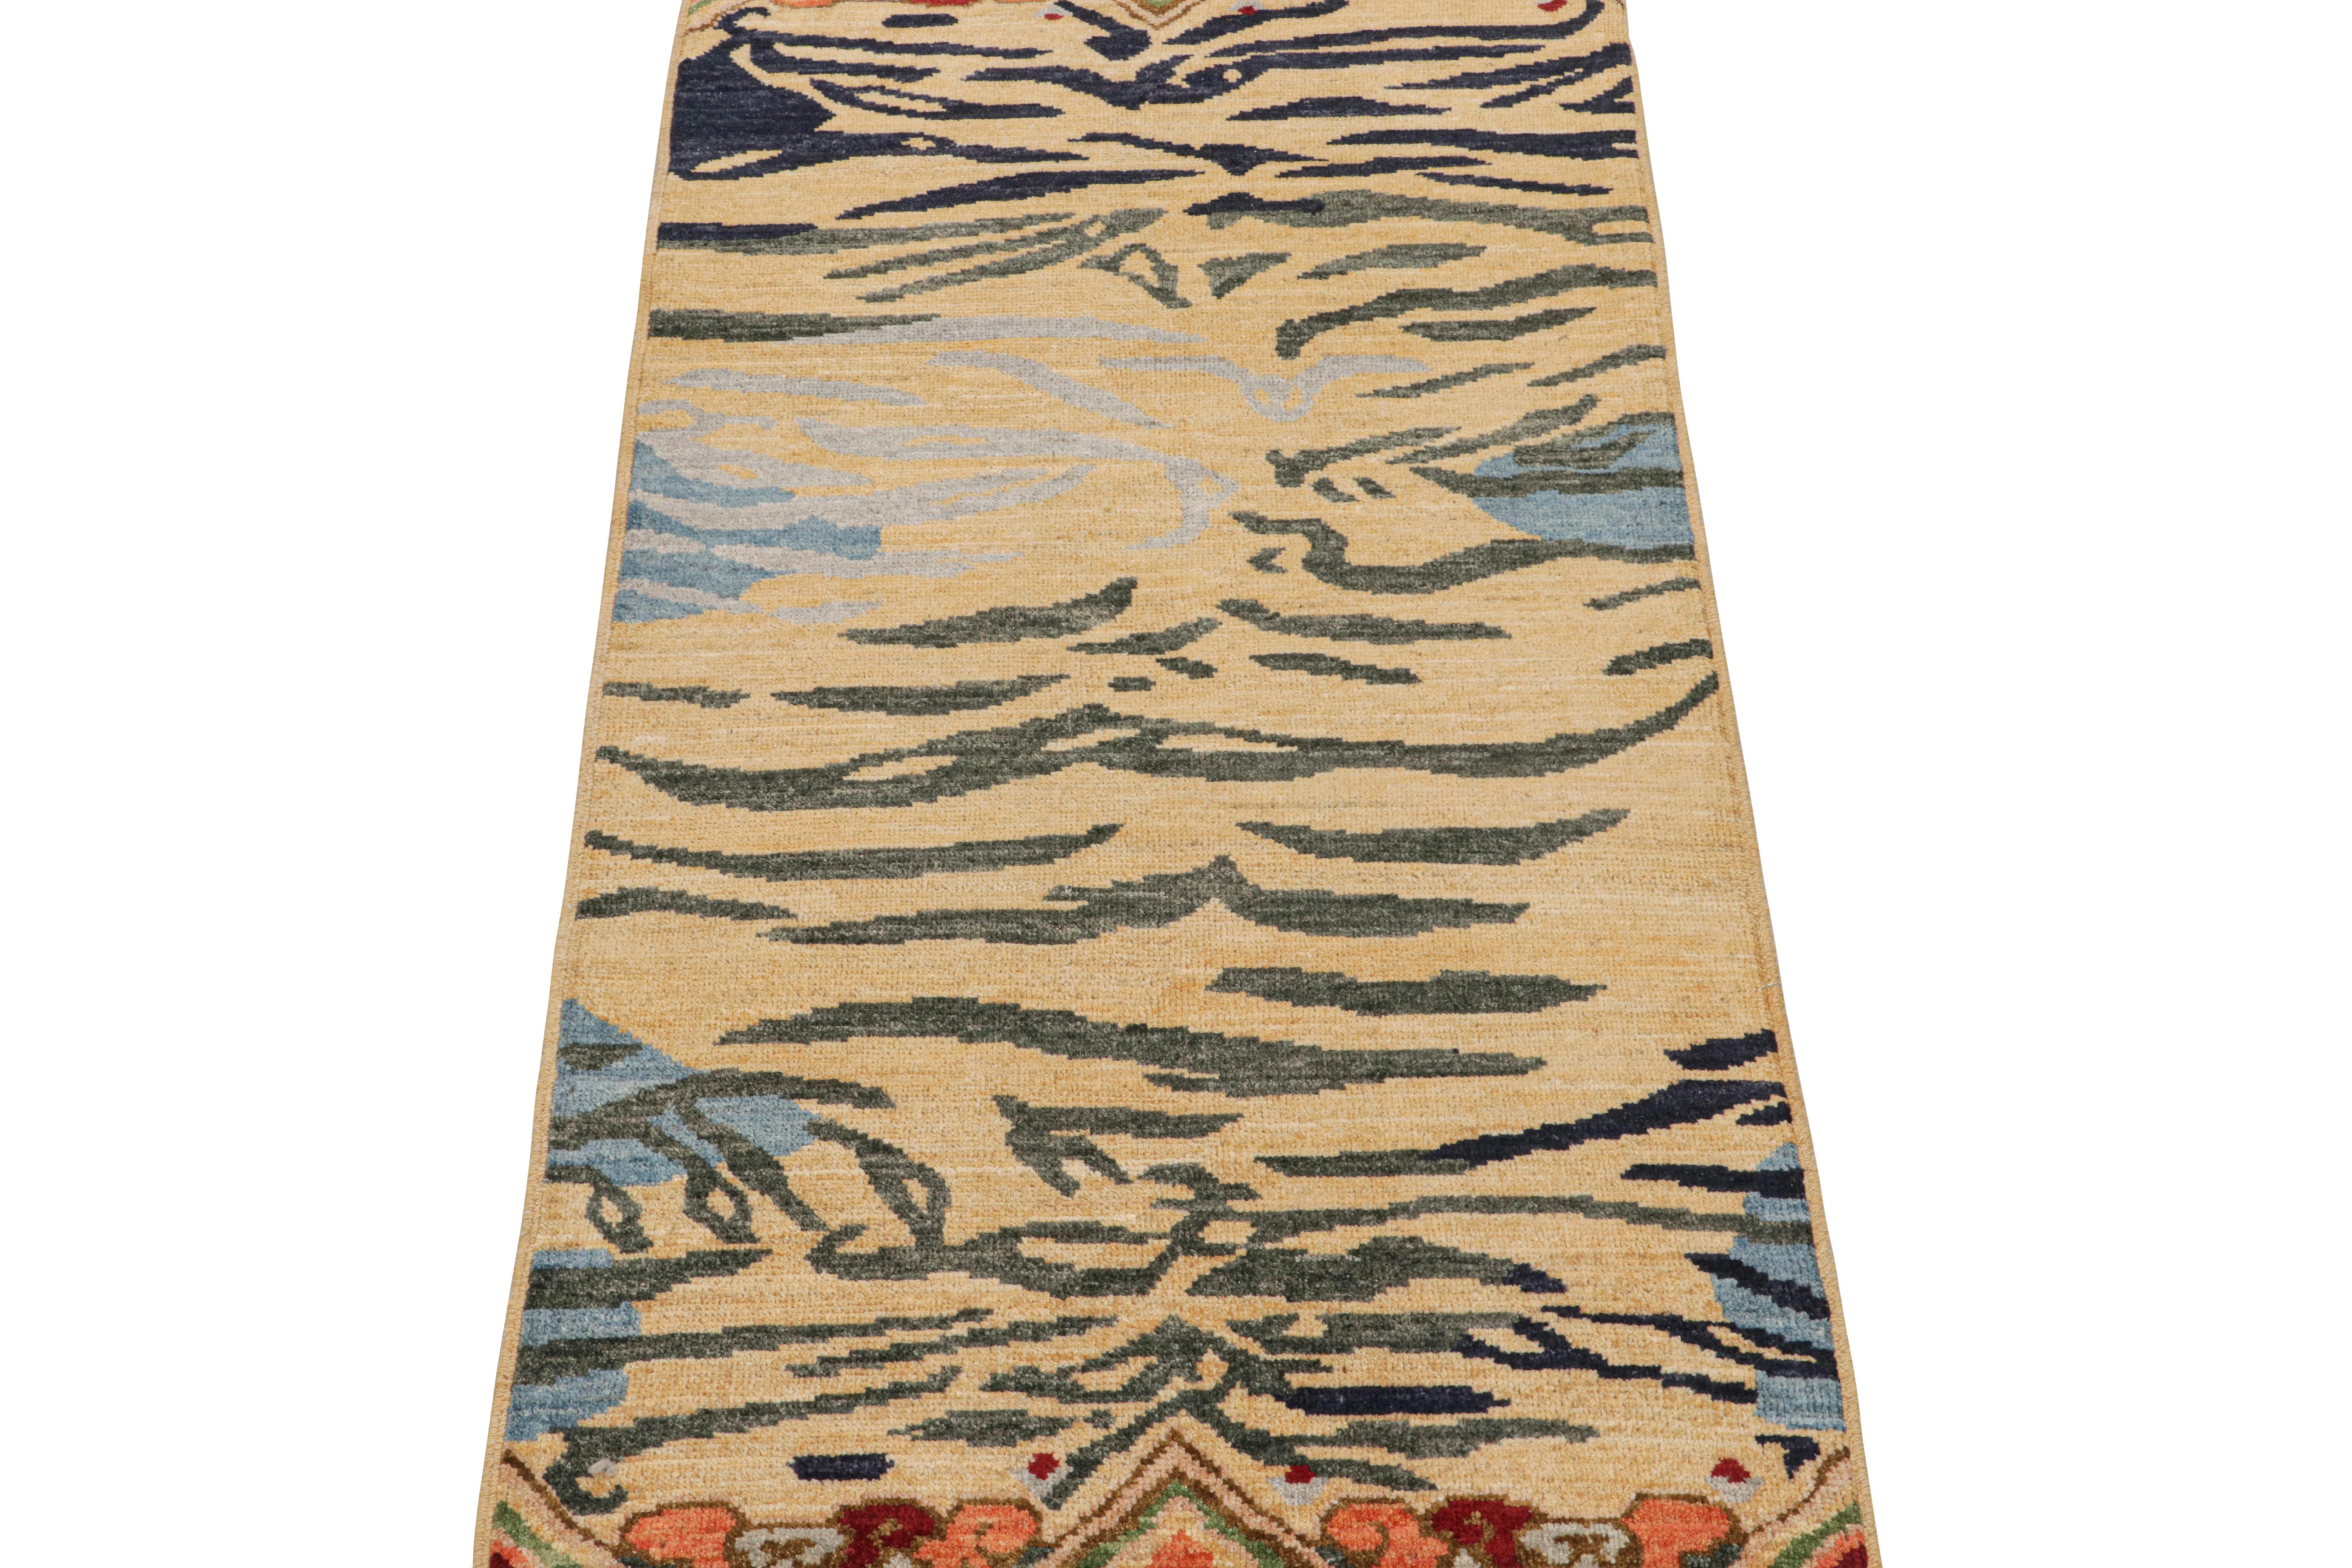 This contemporary 3x6 runner is a bold new addition to Rug & Kilim’s Tigers Collection. Our collection spans several cultures and recaptures iconic pictorial styles in Folk Art and handmade Oriental rugs alike. 

Further on the Design:

This